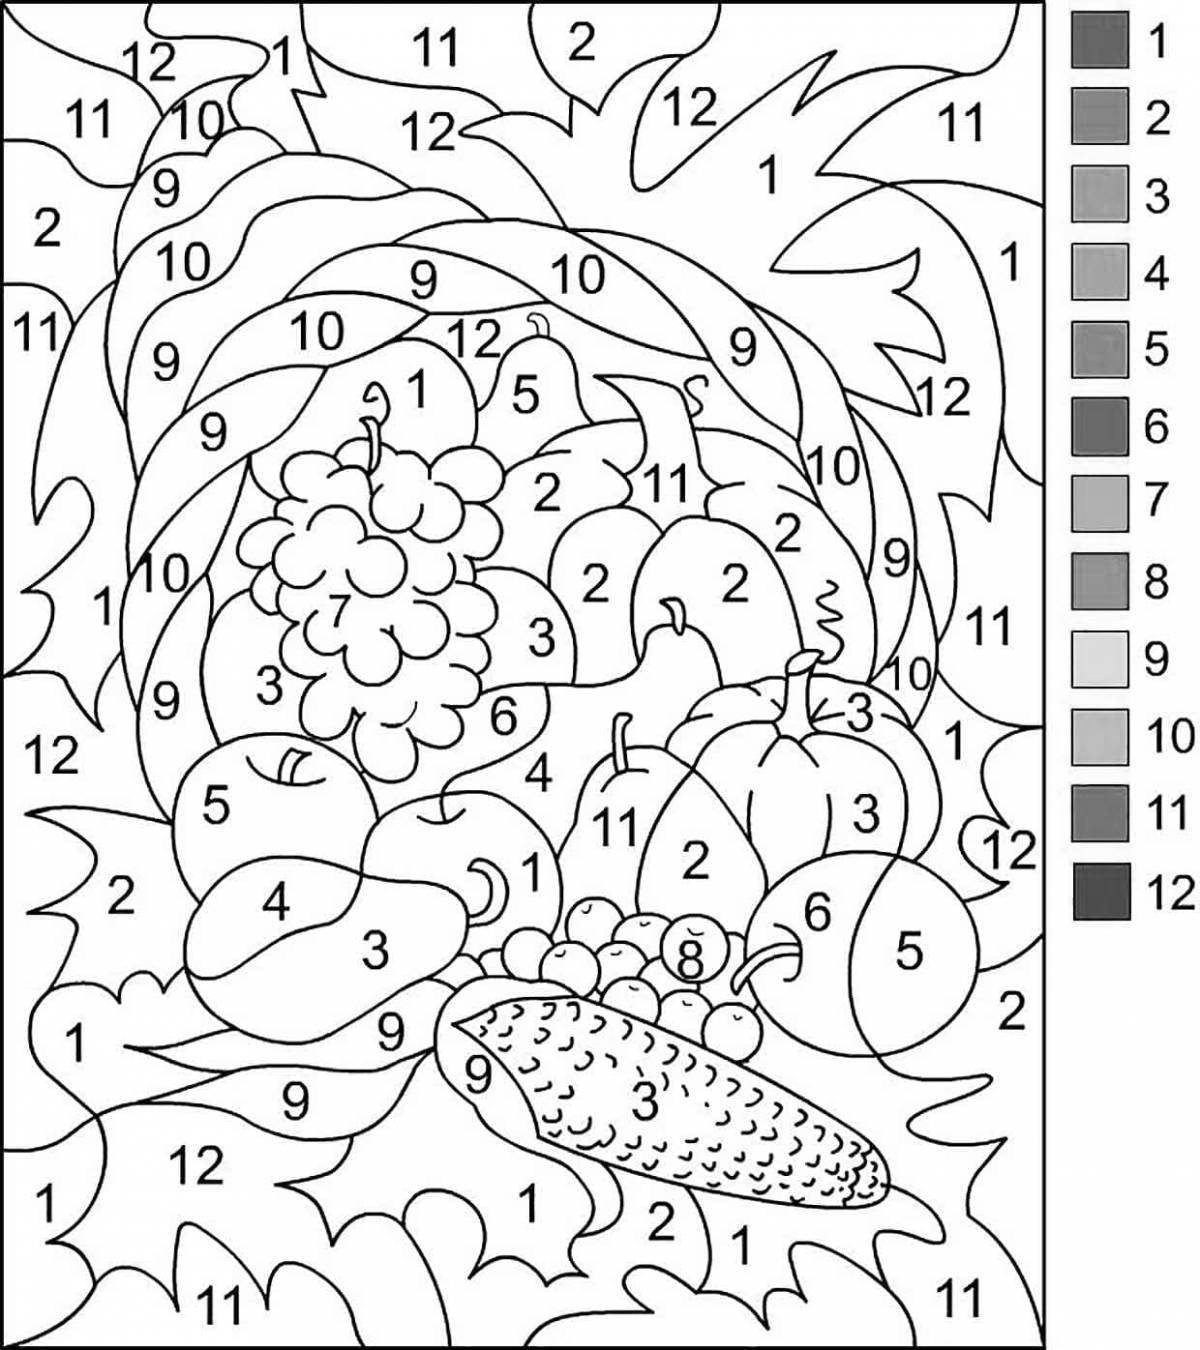 Fun coloring 6 years by numbers